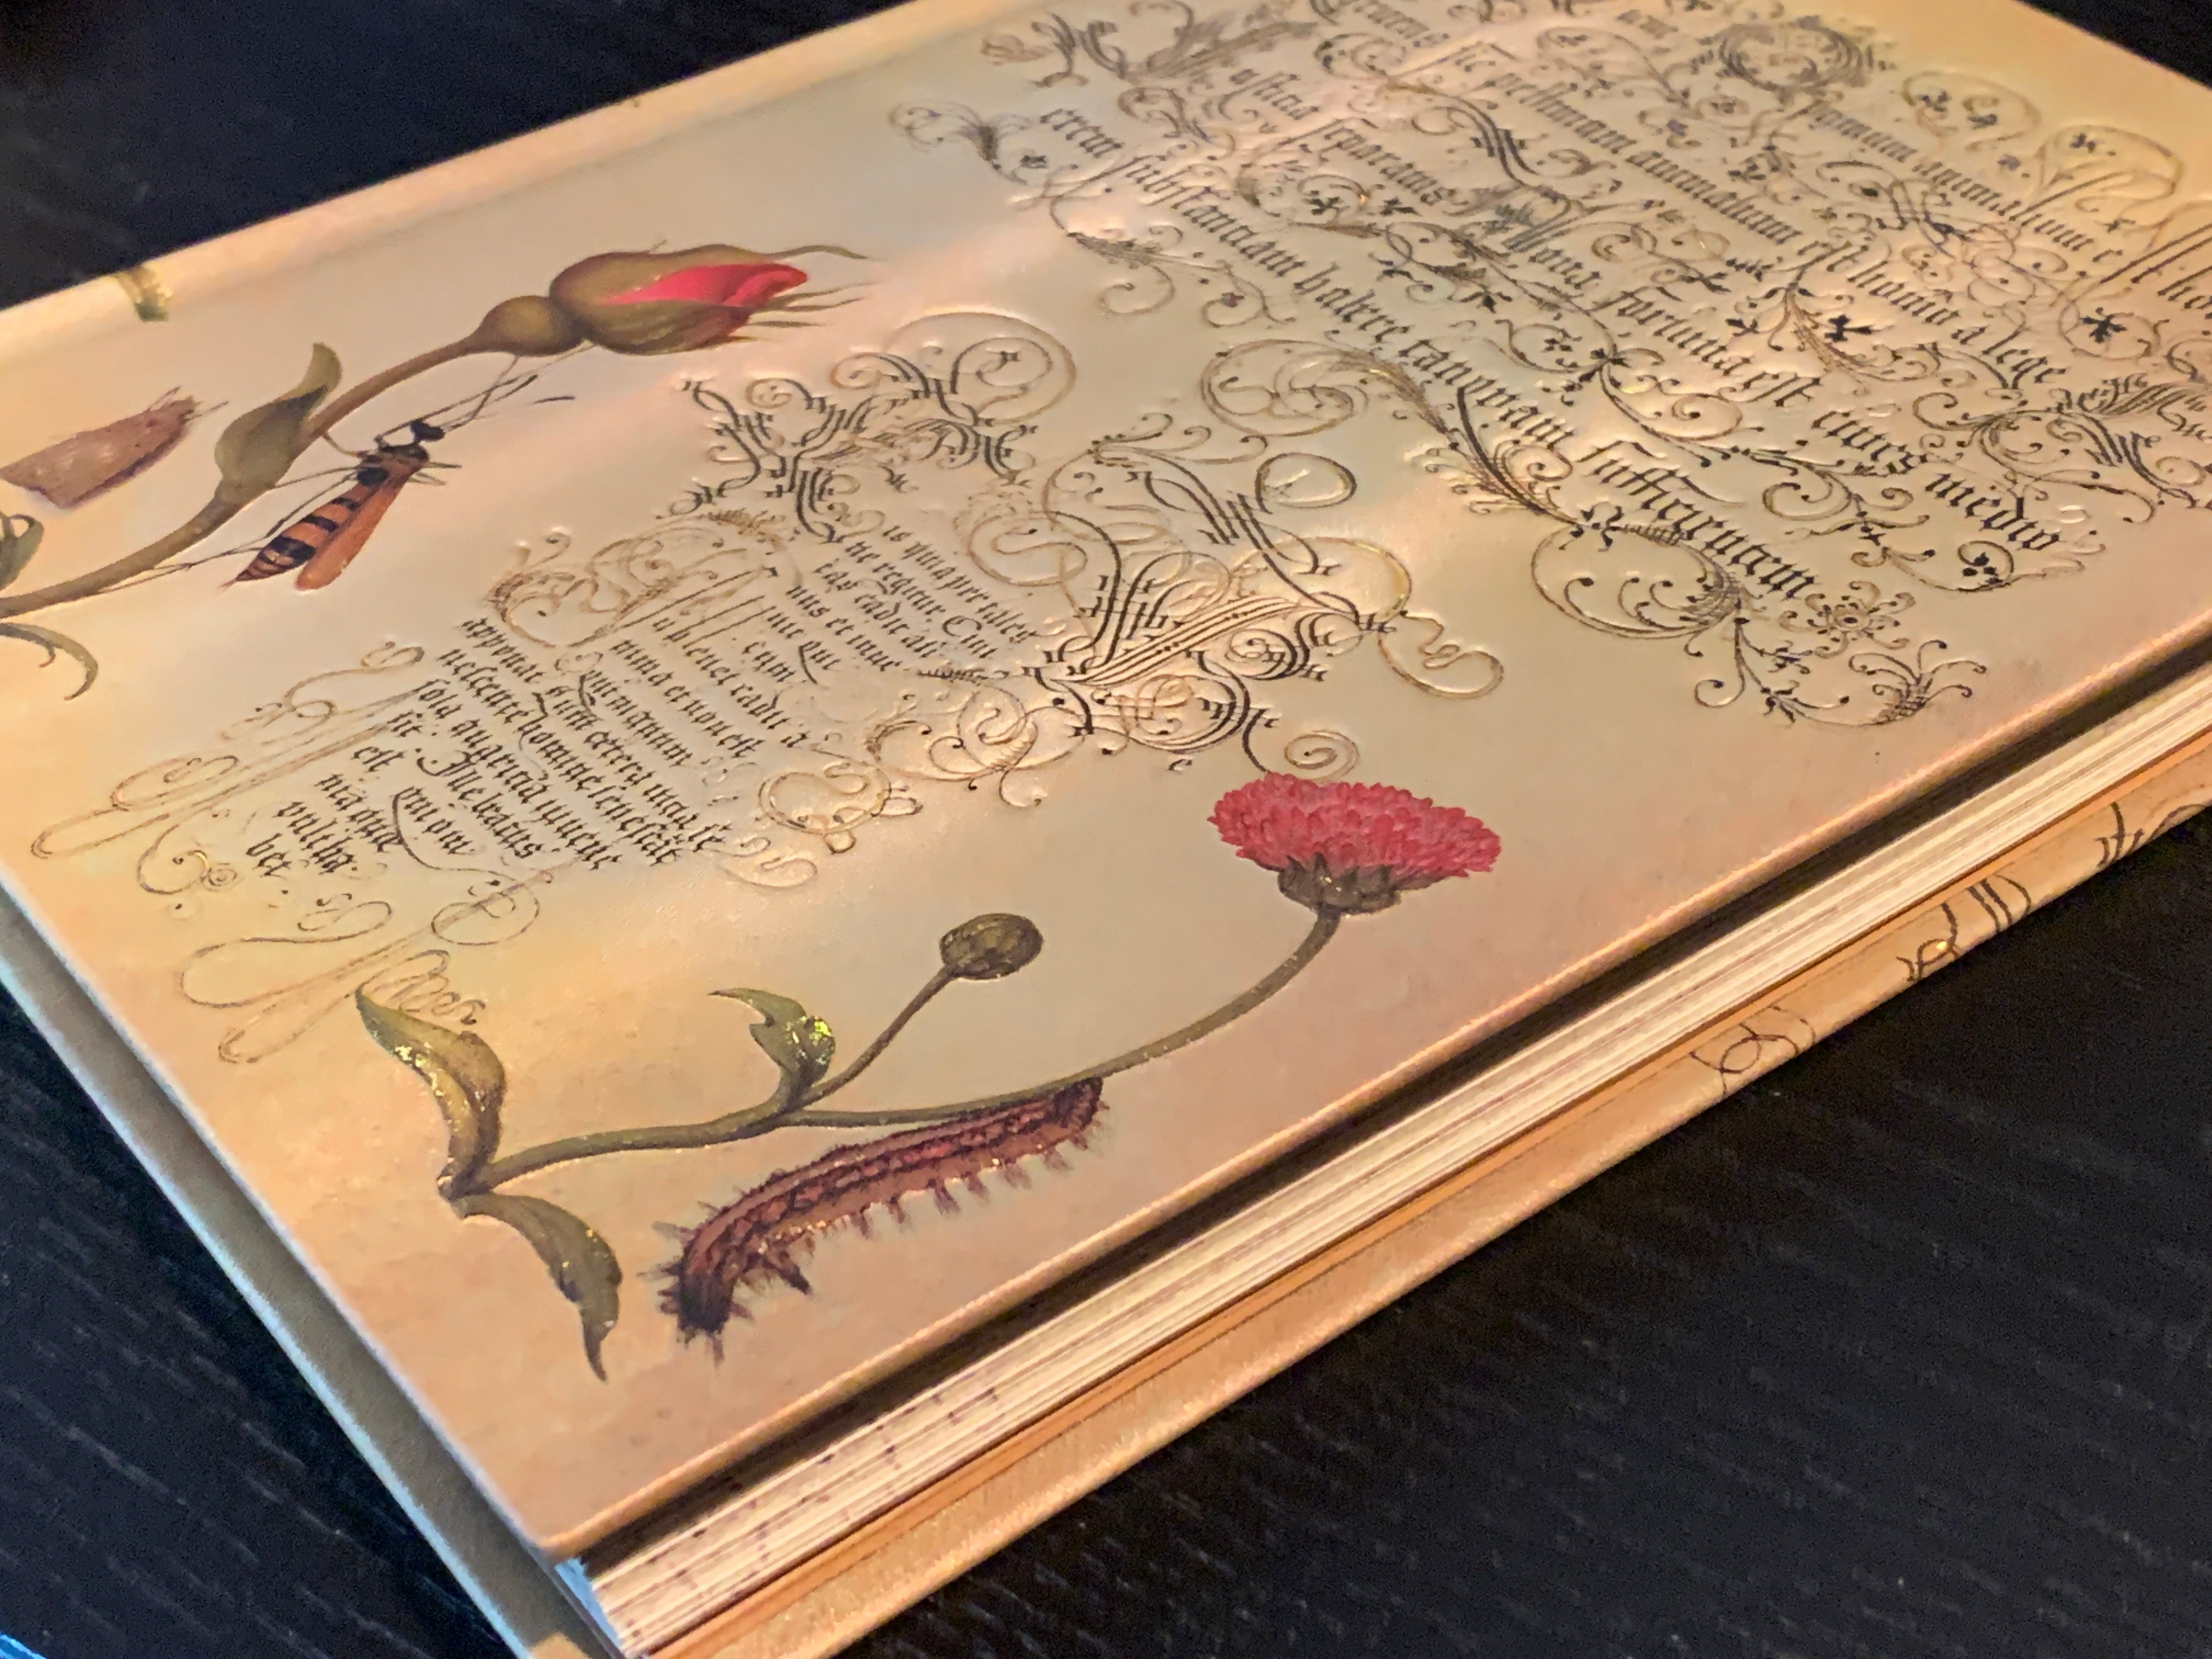 Flemish Rose, Mira Botanica, Journal with Gilt Accents, Lined, Paperblanks, 7in x 5in